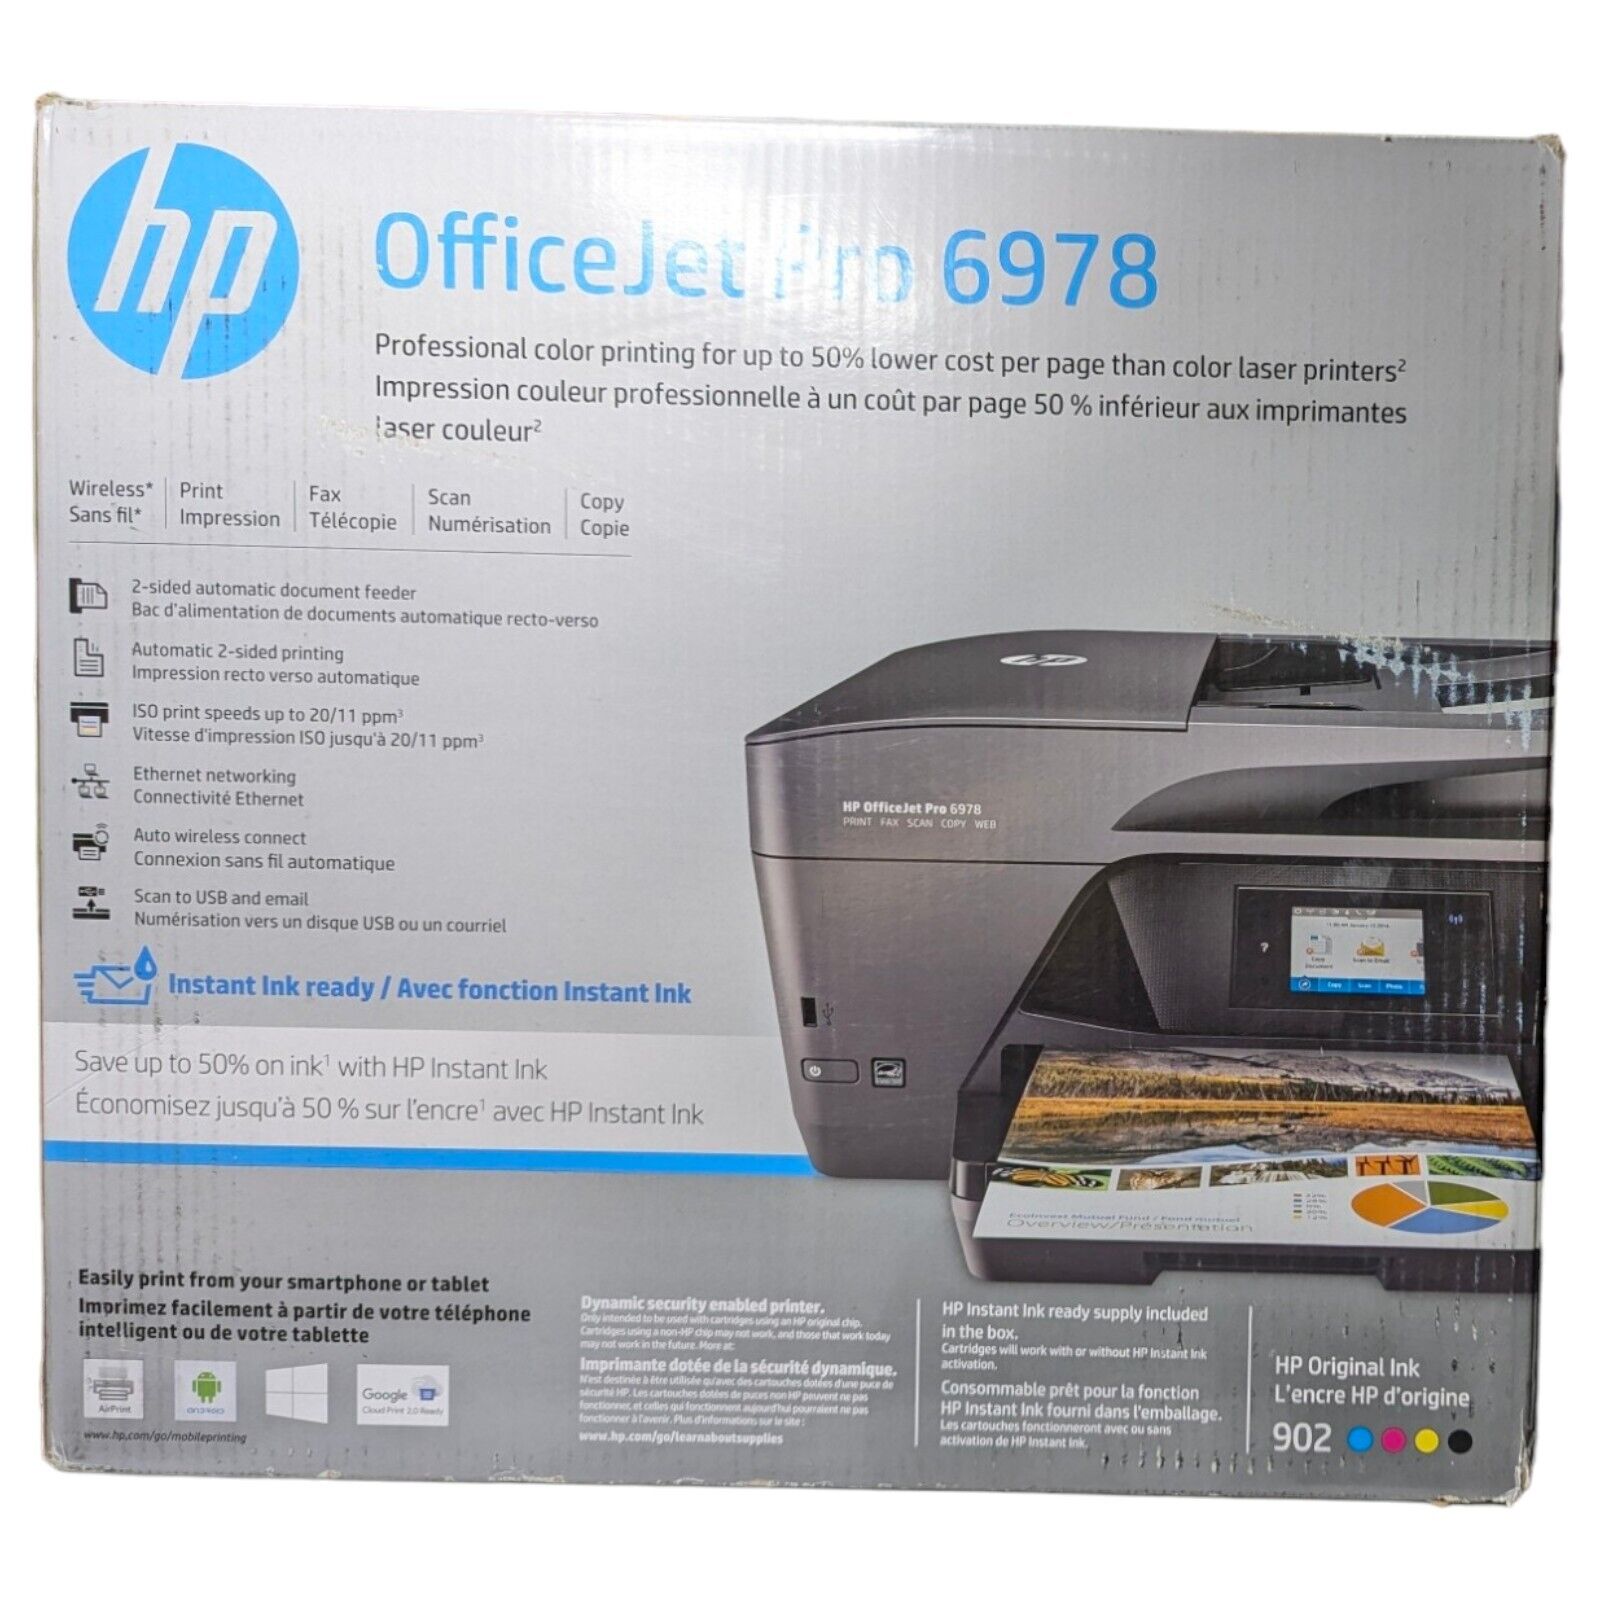 BRAND NEW HP OfficeJet Pro 6978 All-in-One Wireless Printer